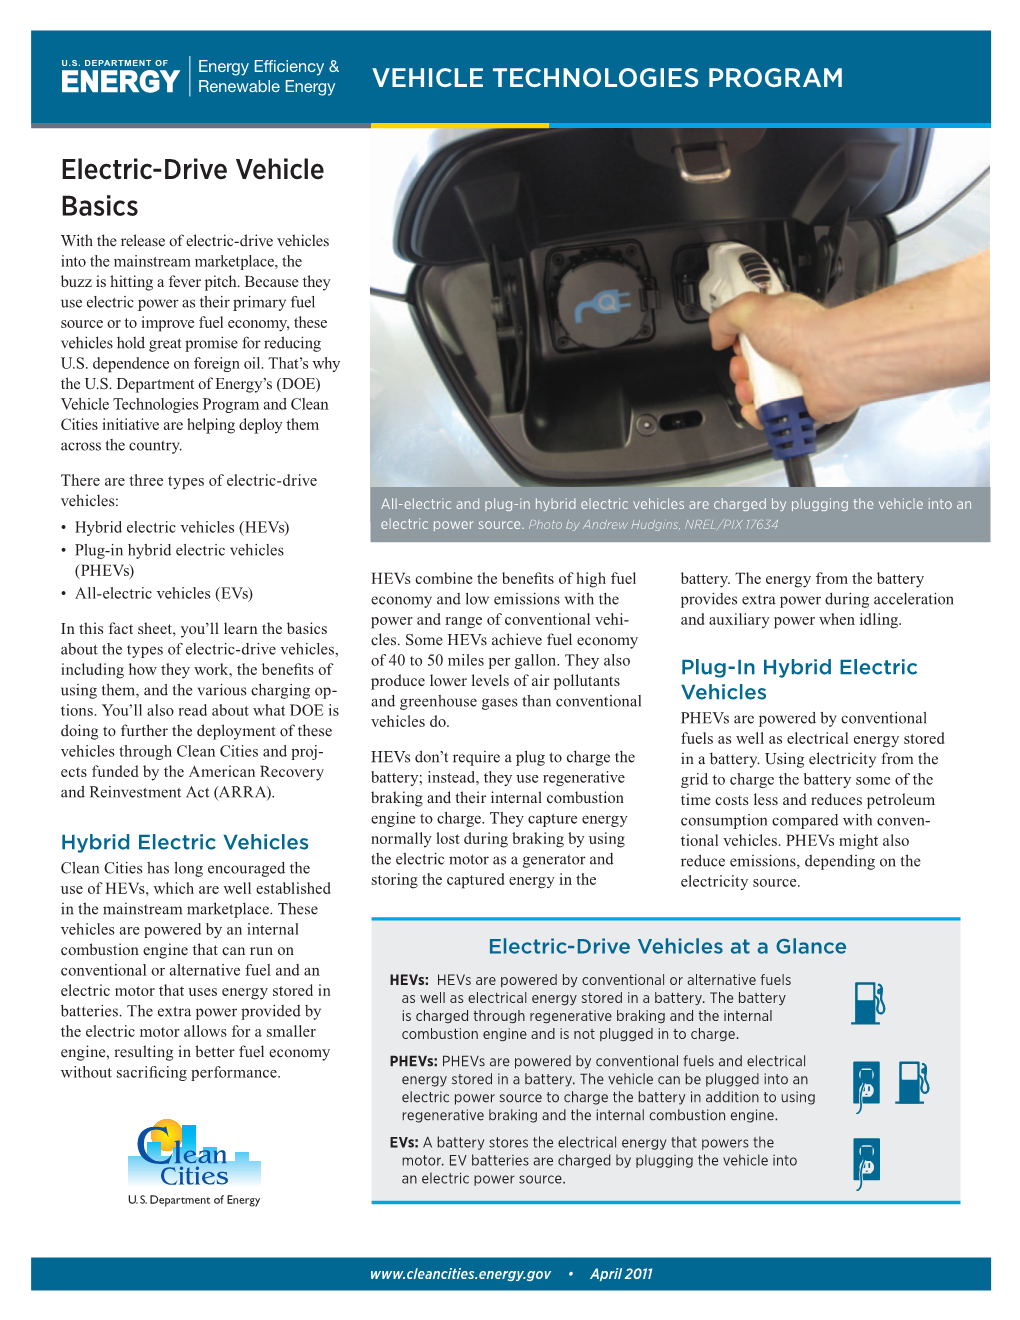 Electric-Drive Vehicle Basics with the Release of Electric-Drive Vehicles Into the Mainstream Marketplace, the Buzz Is Hitting a Fever Pitch